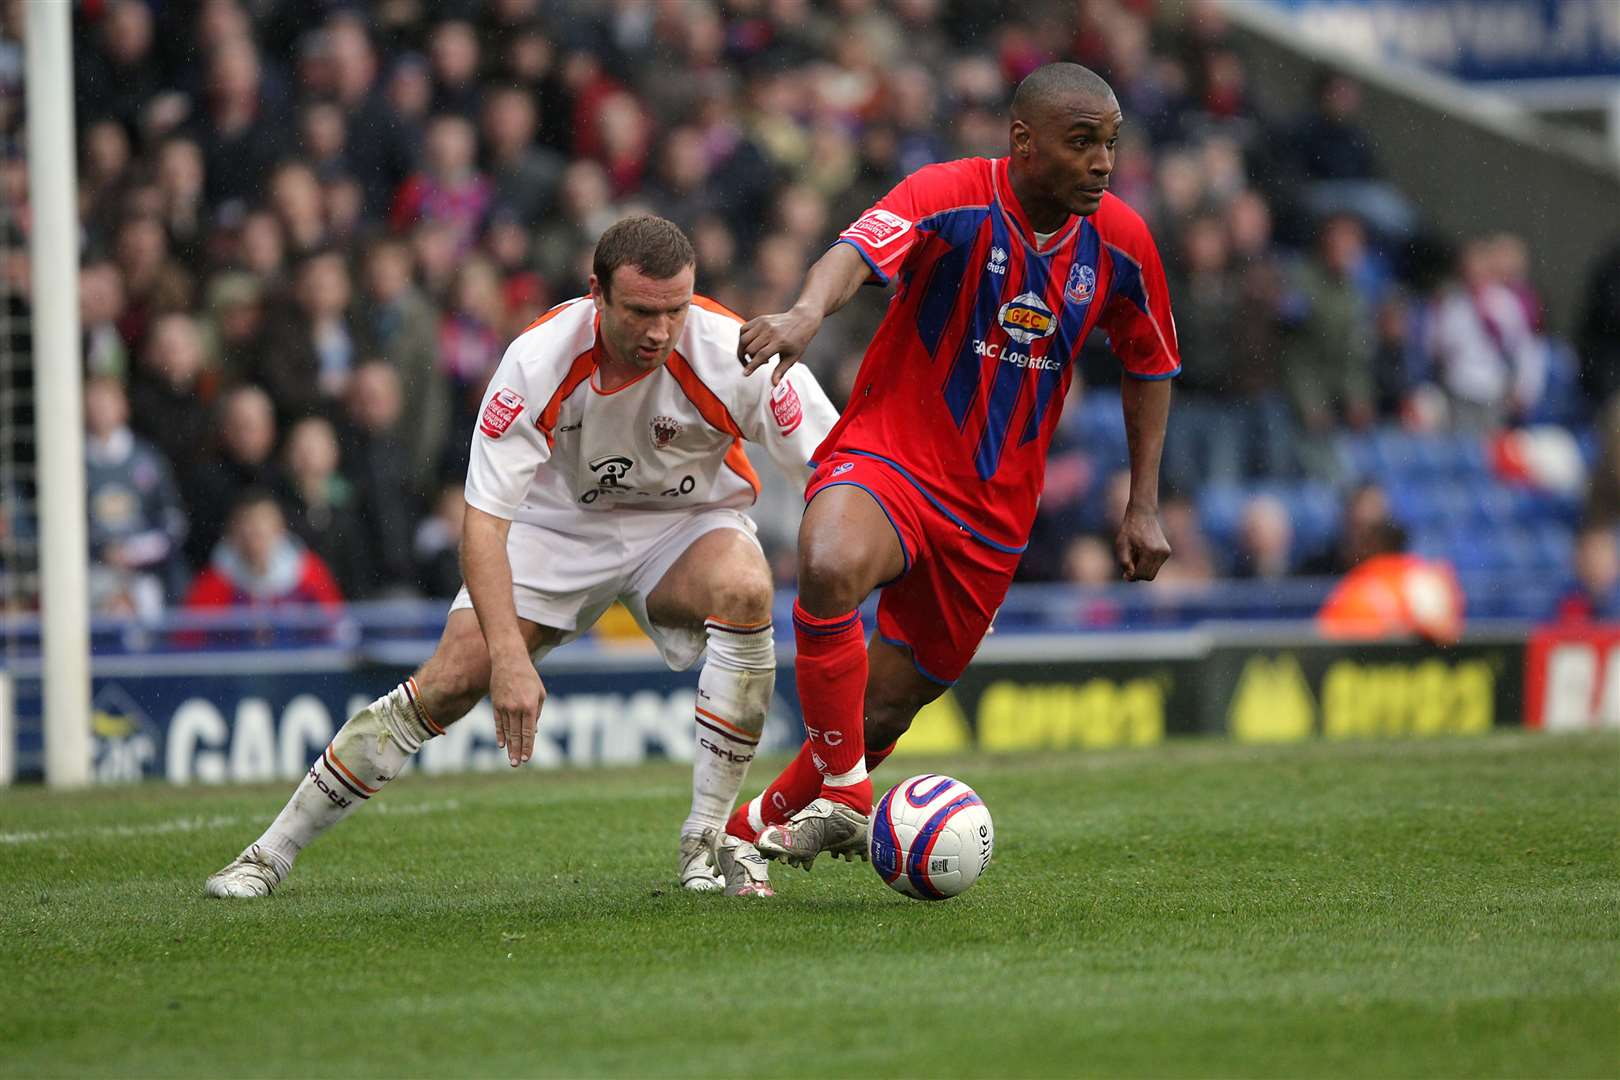 Former Crystal Palace striker Clinton Morrison is lining up in the charity match at Snodland Town FC. Picture: Neil Everitt